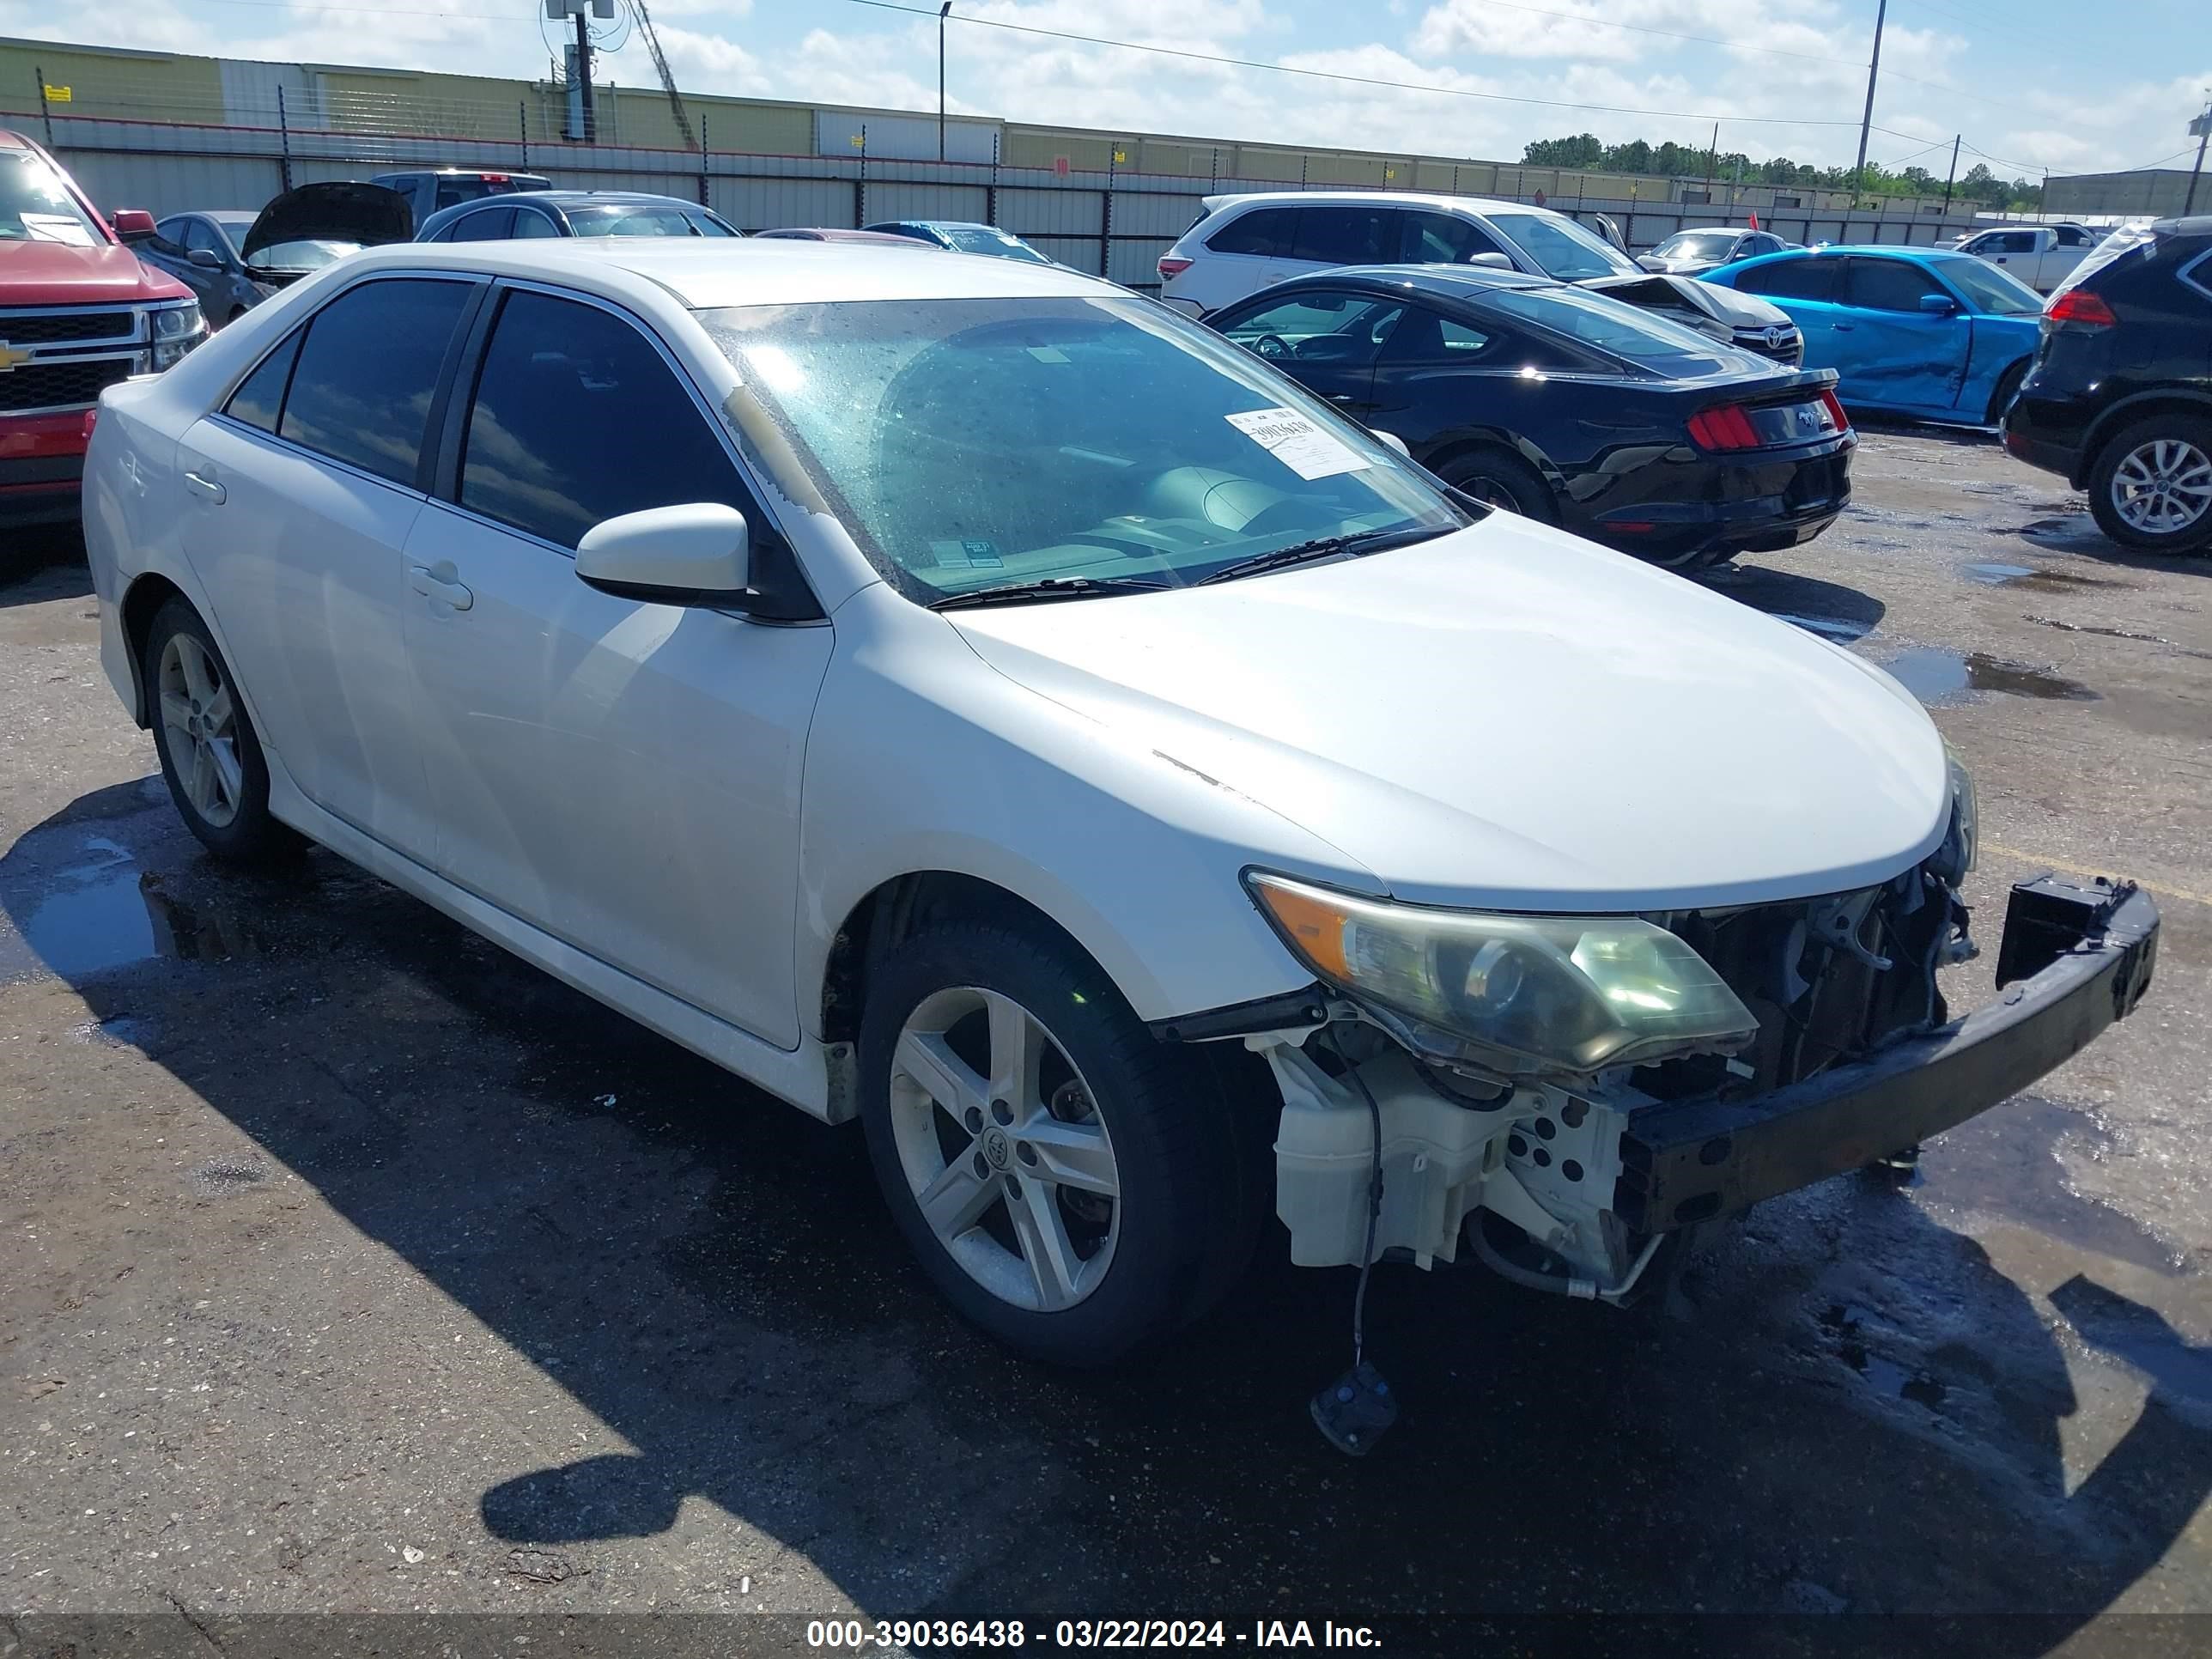 vin: 4T1BF1FK2EU425074 4T1BF1FK2EU425074 2014 toyota camry 2500 for Sale in 77038, 2535 West Mt. Houston Road, Houston, USA